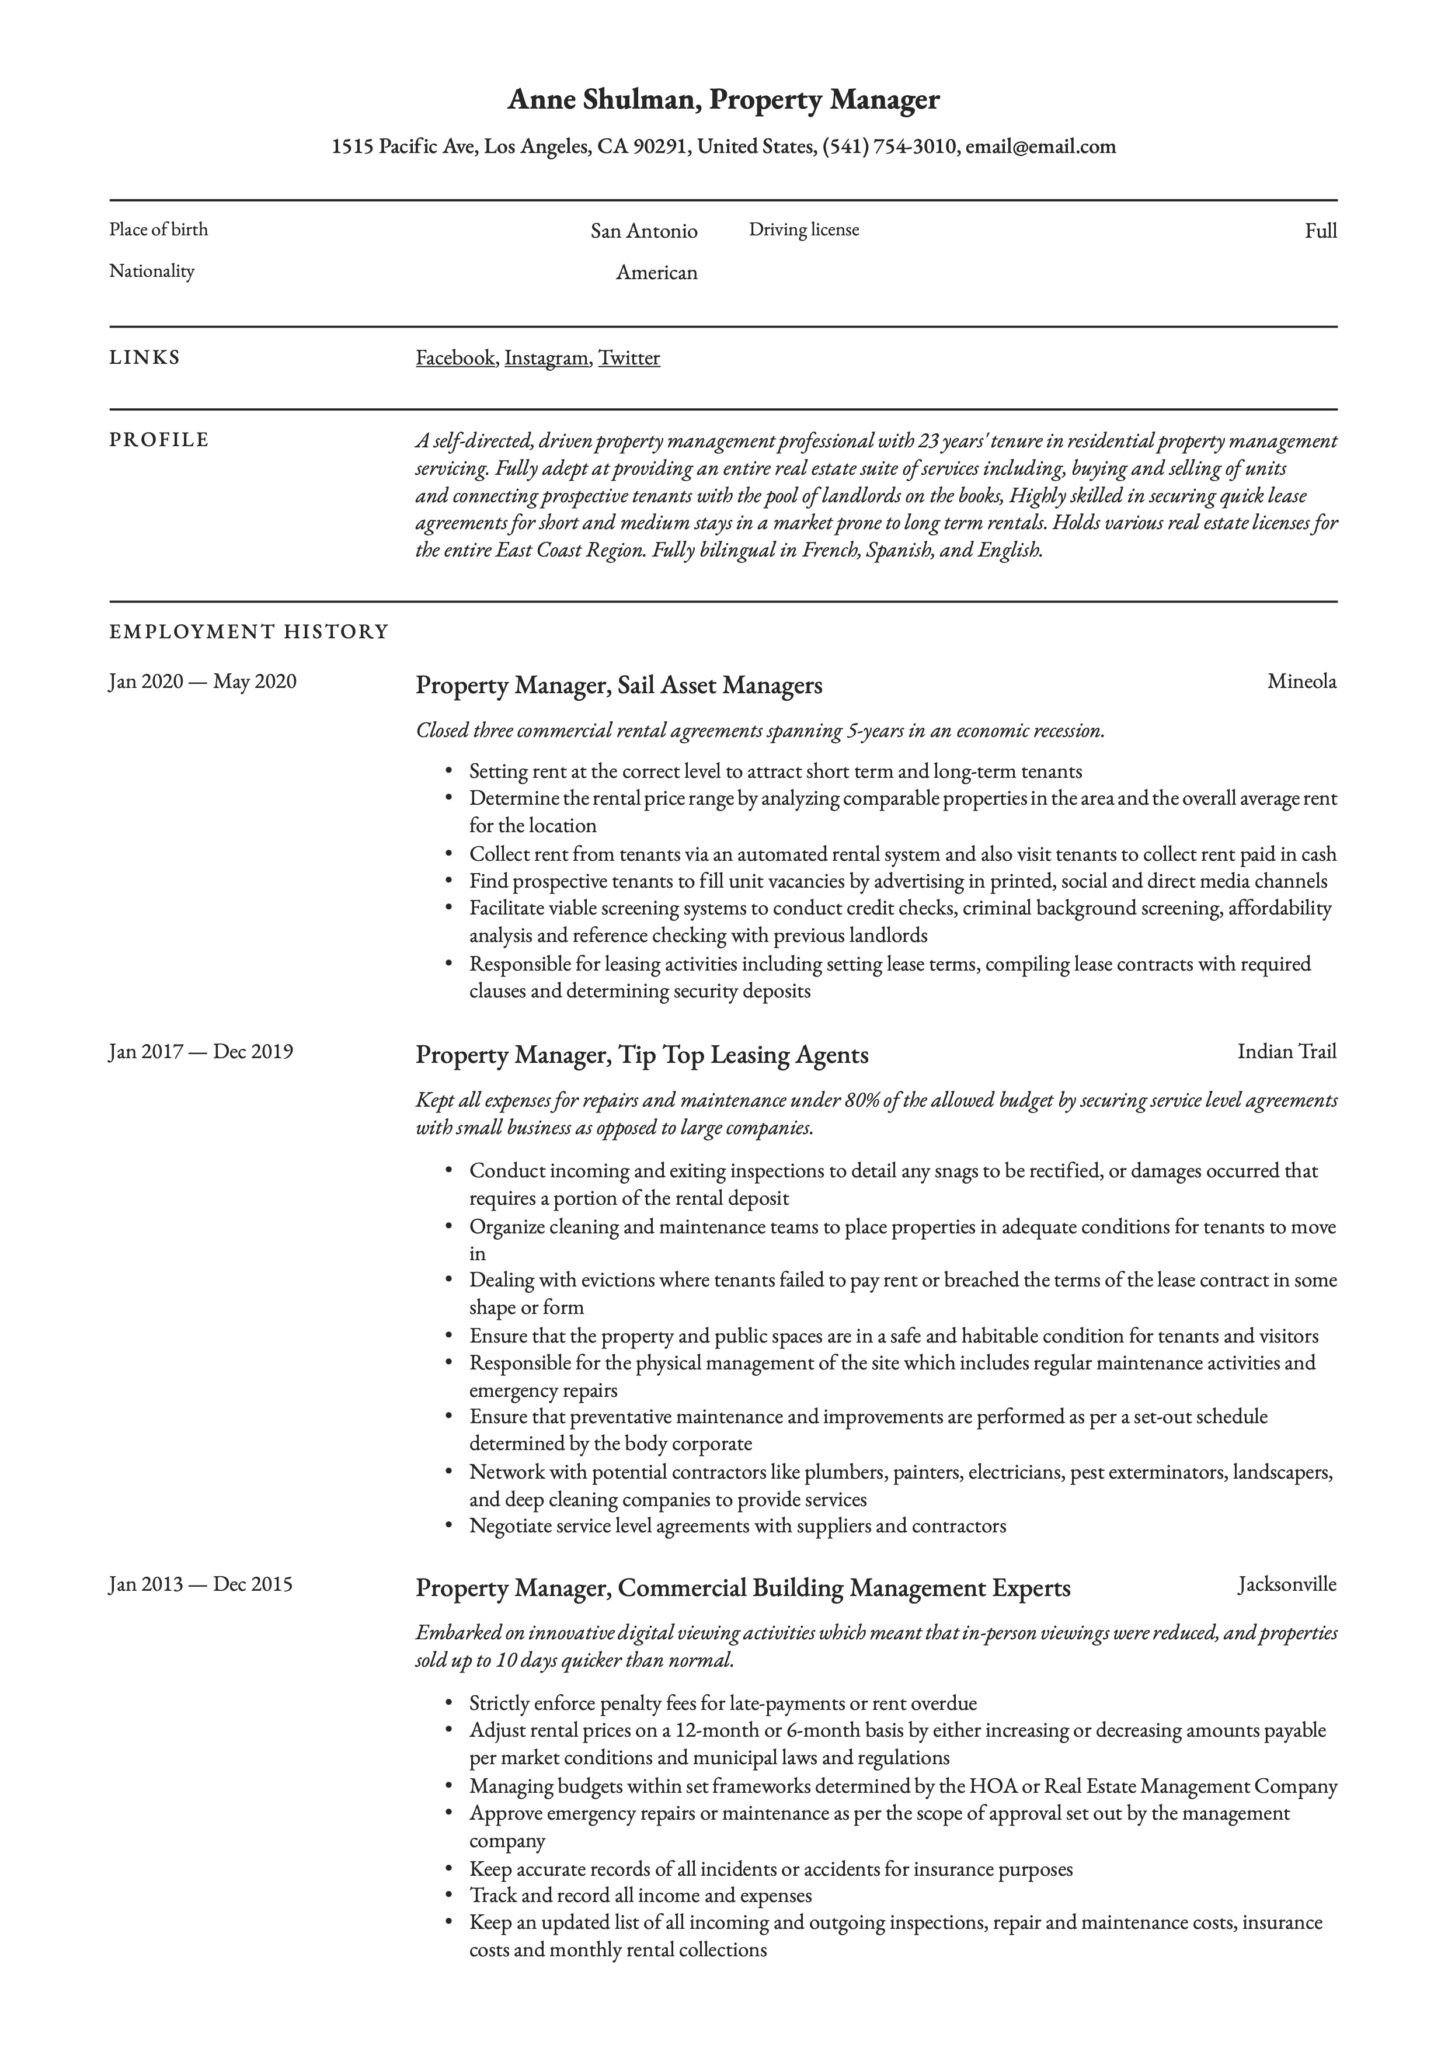 Sample Resume for Property Management Job Property Manager Resume & Writing Guide  18 Templates 2020